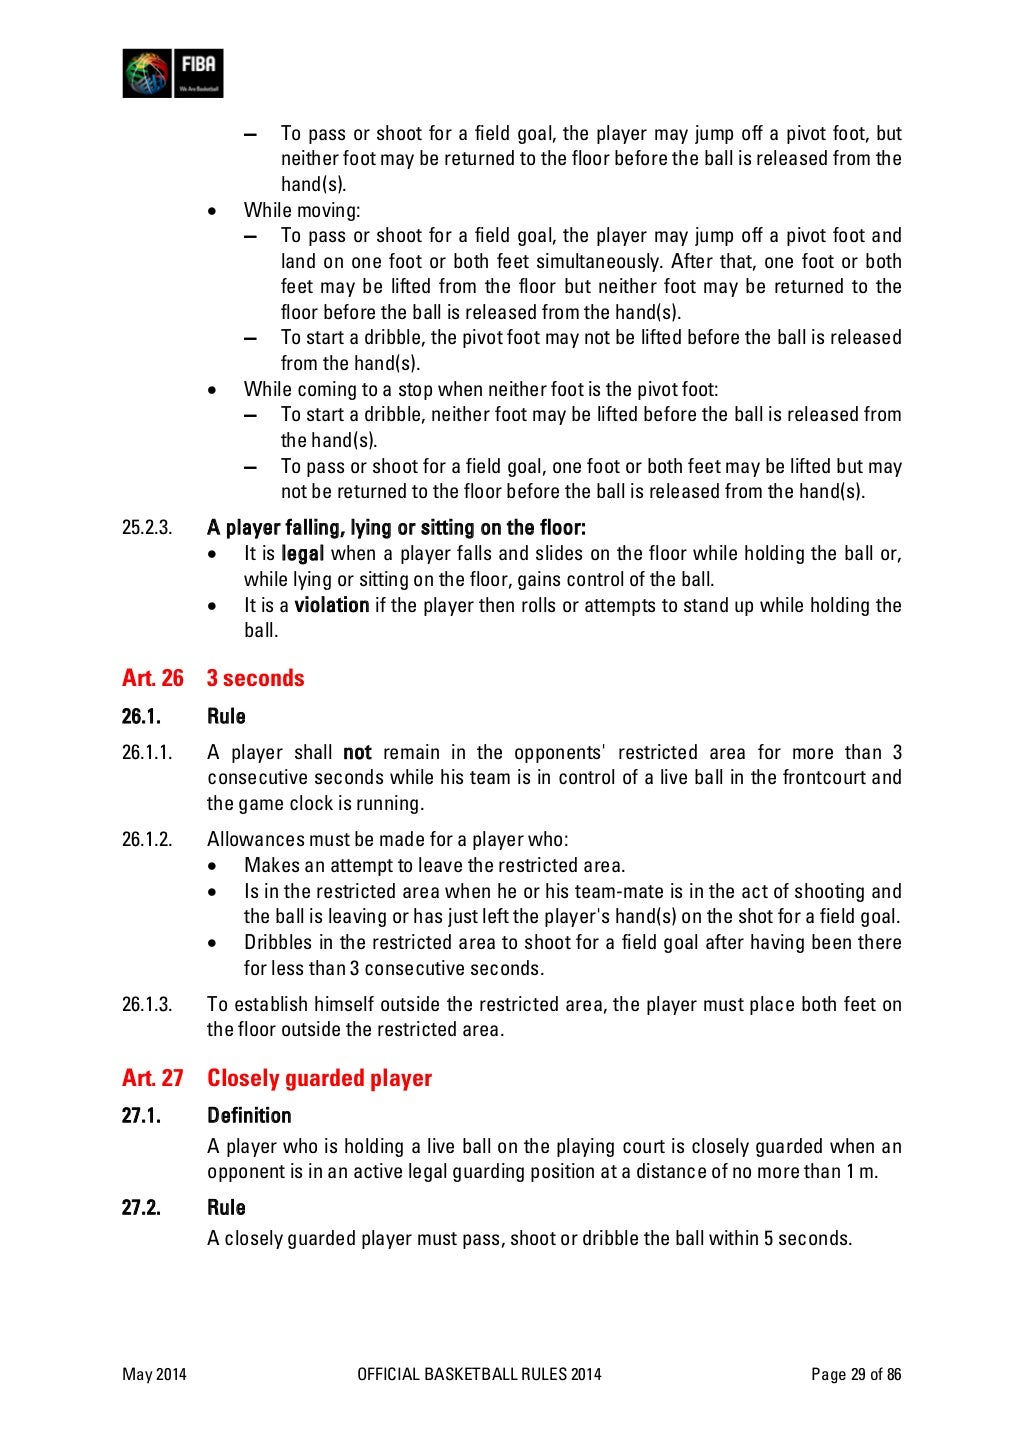 Official basketball rules_2014_y